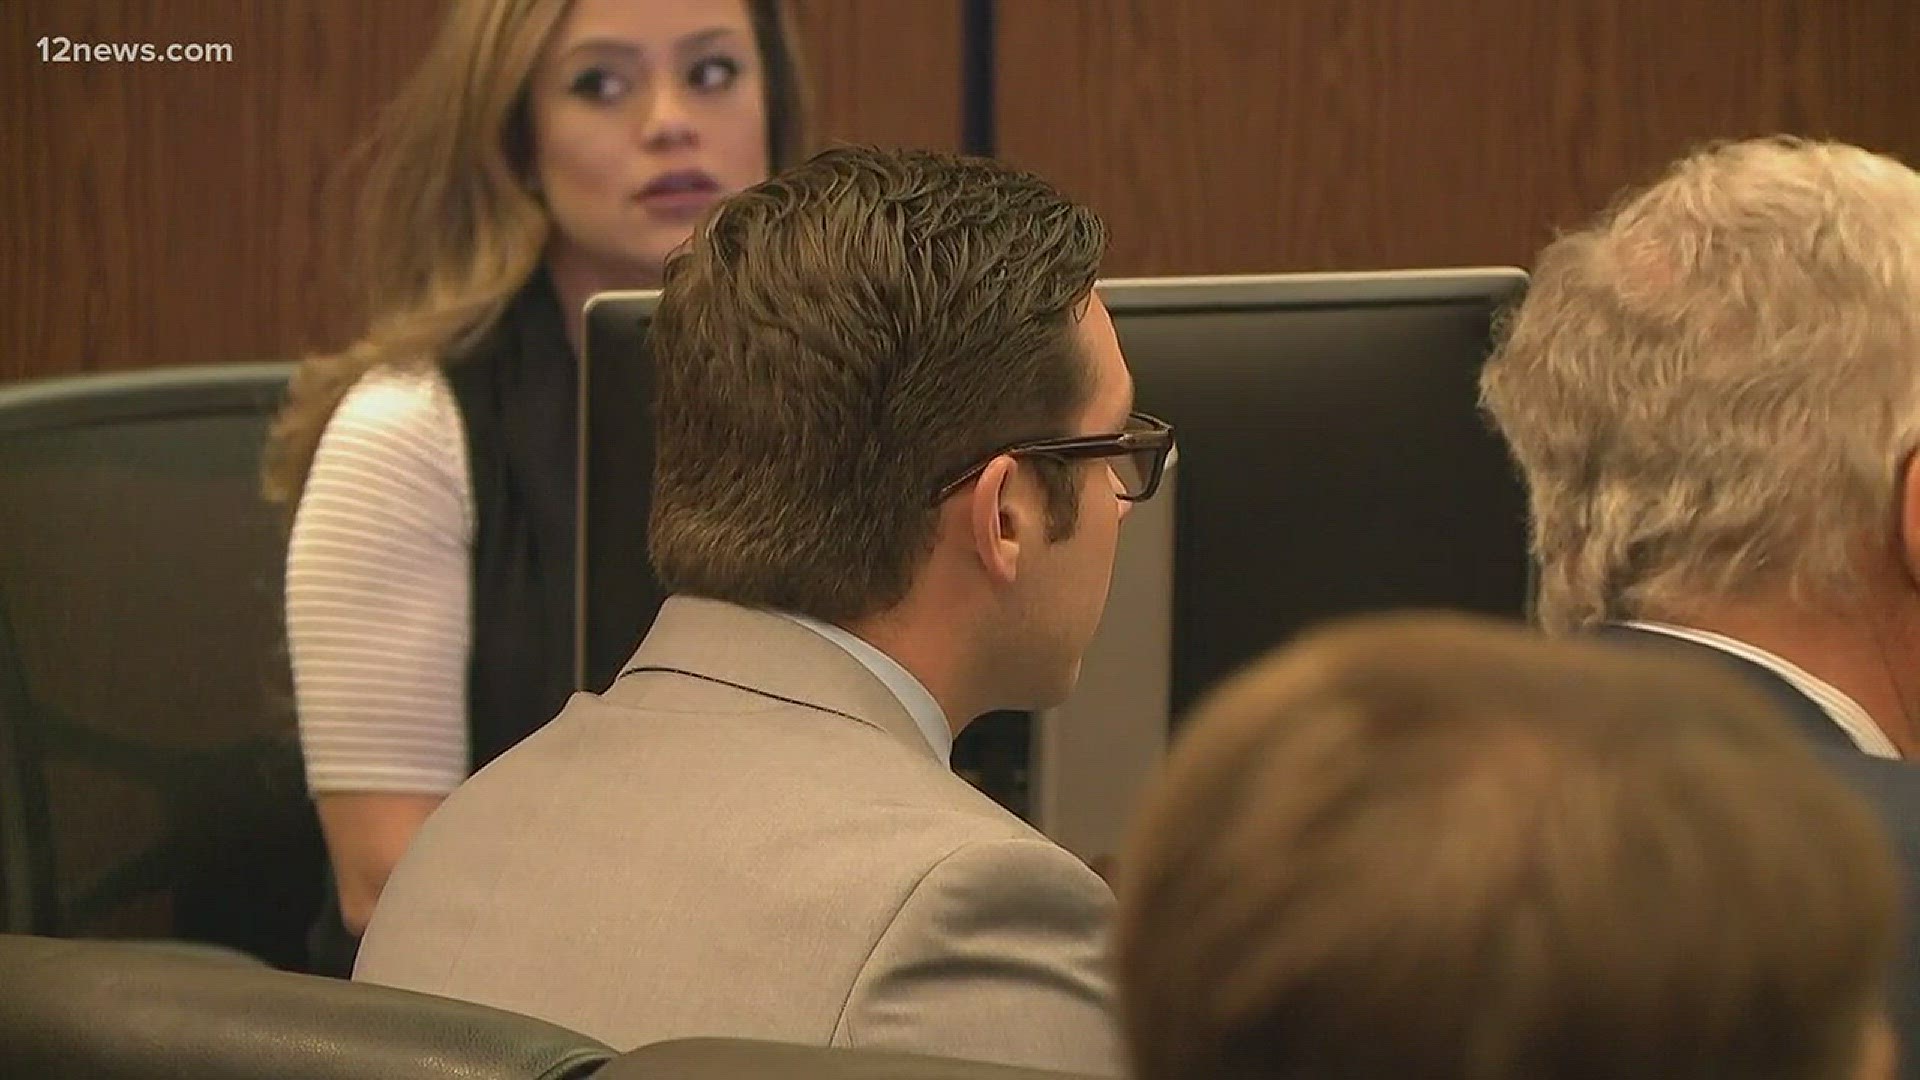 The jury found former Mesa officer Philip Brailsford "not guilty" of second degree murder in the death of Daniel Shaver.